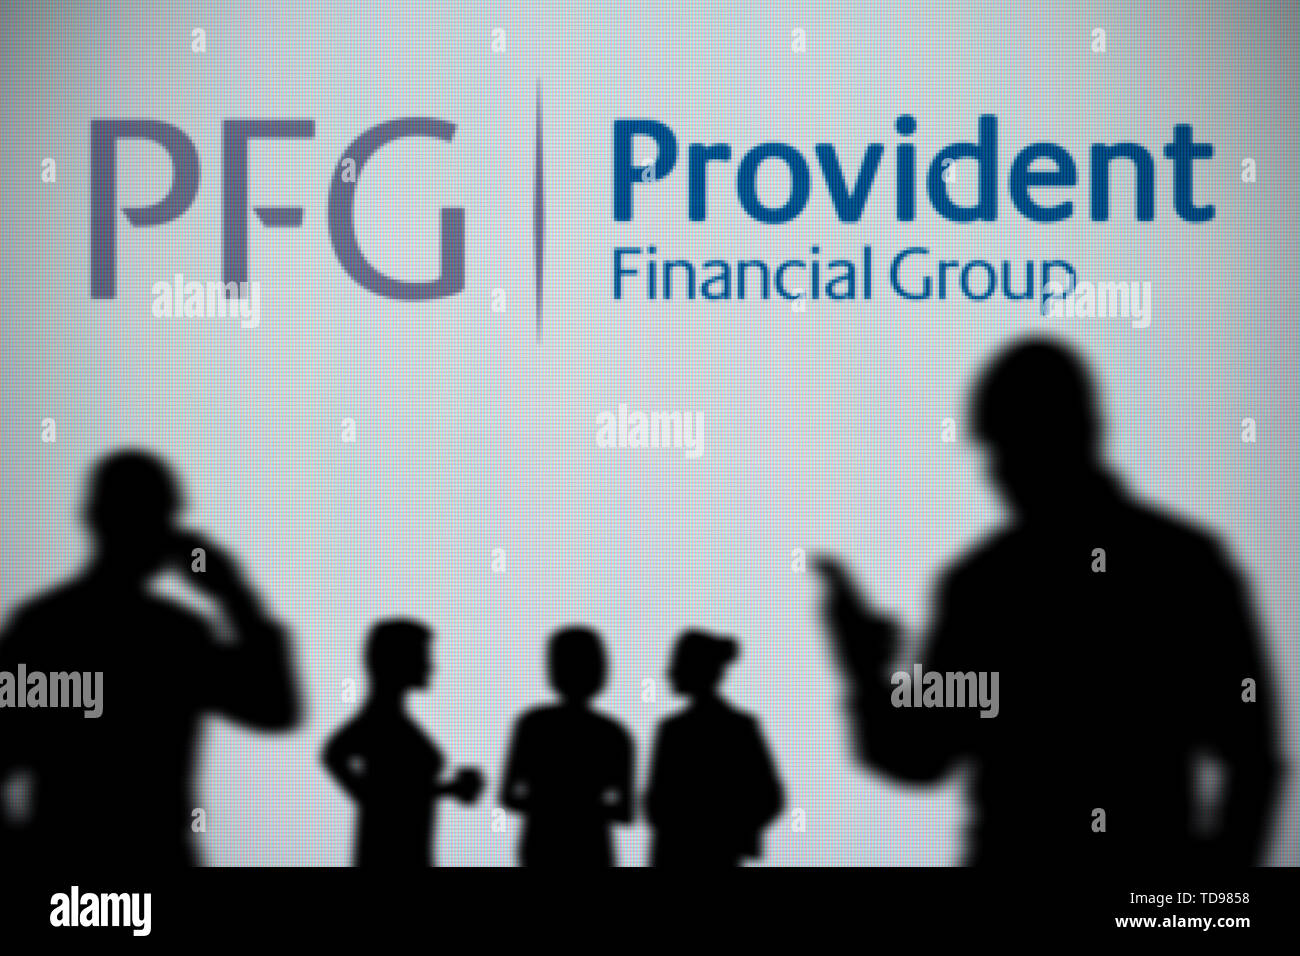 The Provident Financial Group (PFG) logo is seen on an LED screen in the background while a silhouetted person uses a smartphone (Editorial use only) Stock Photo